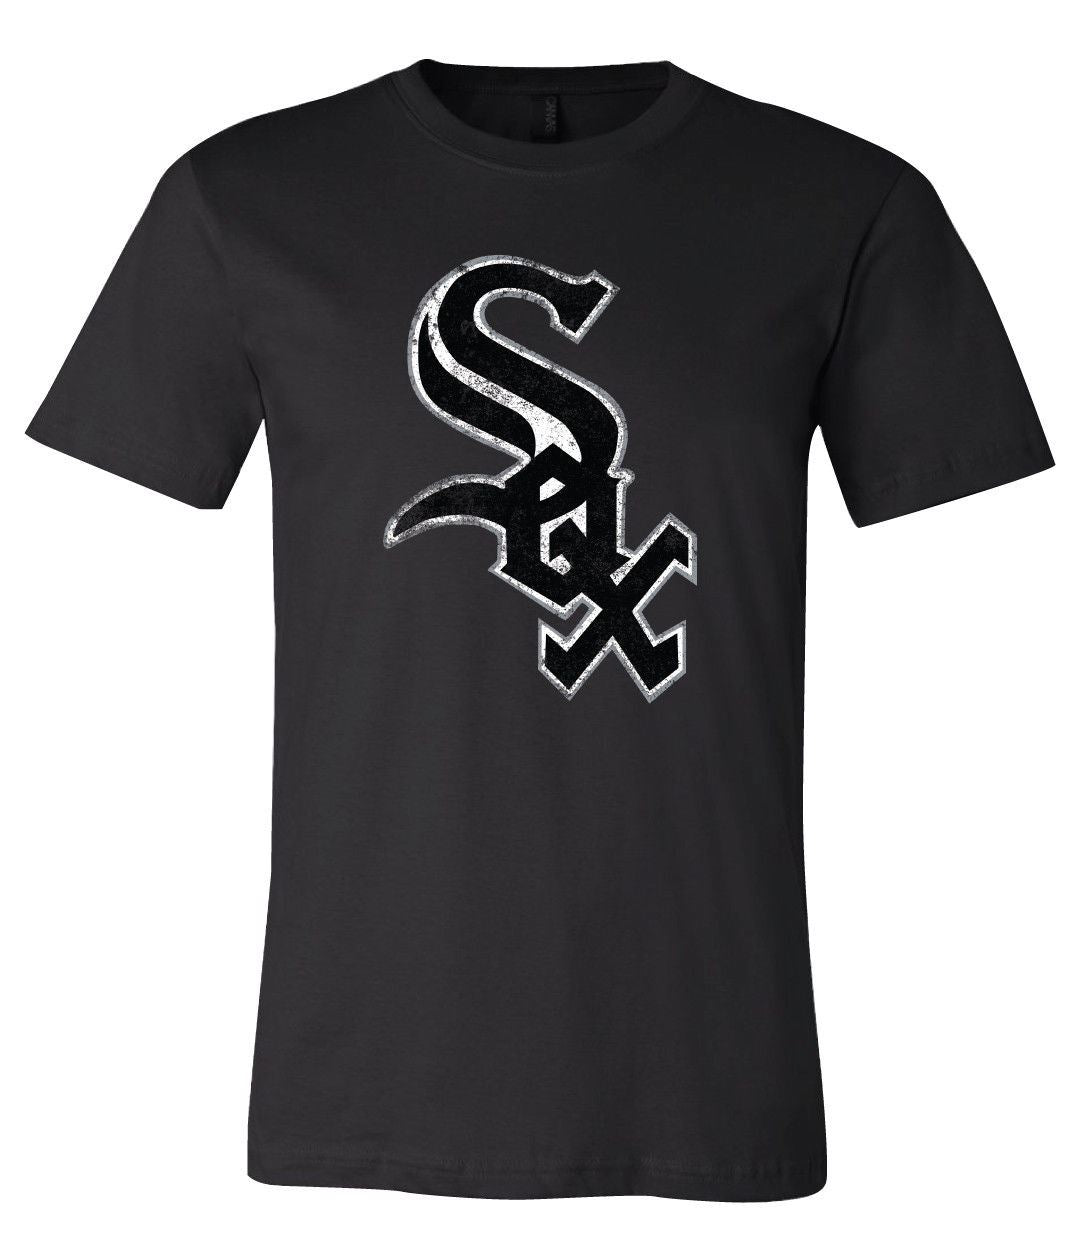 Chicago White Sox Vintage in Chicago White Sox Team Shop 